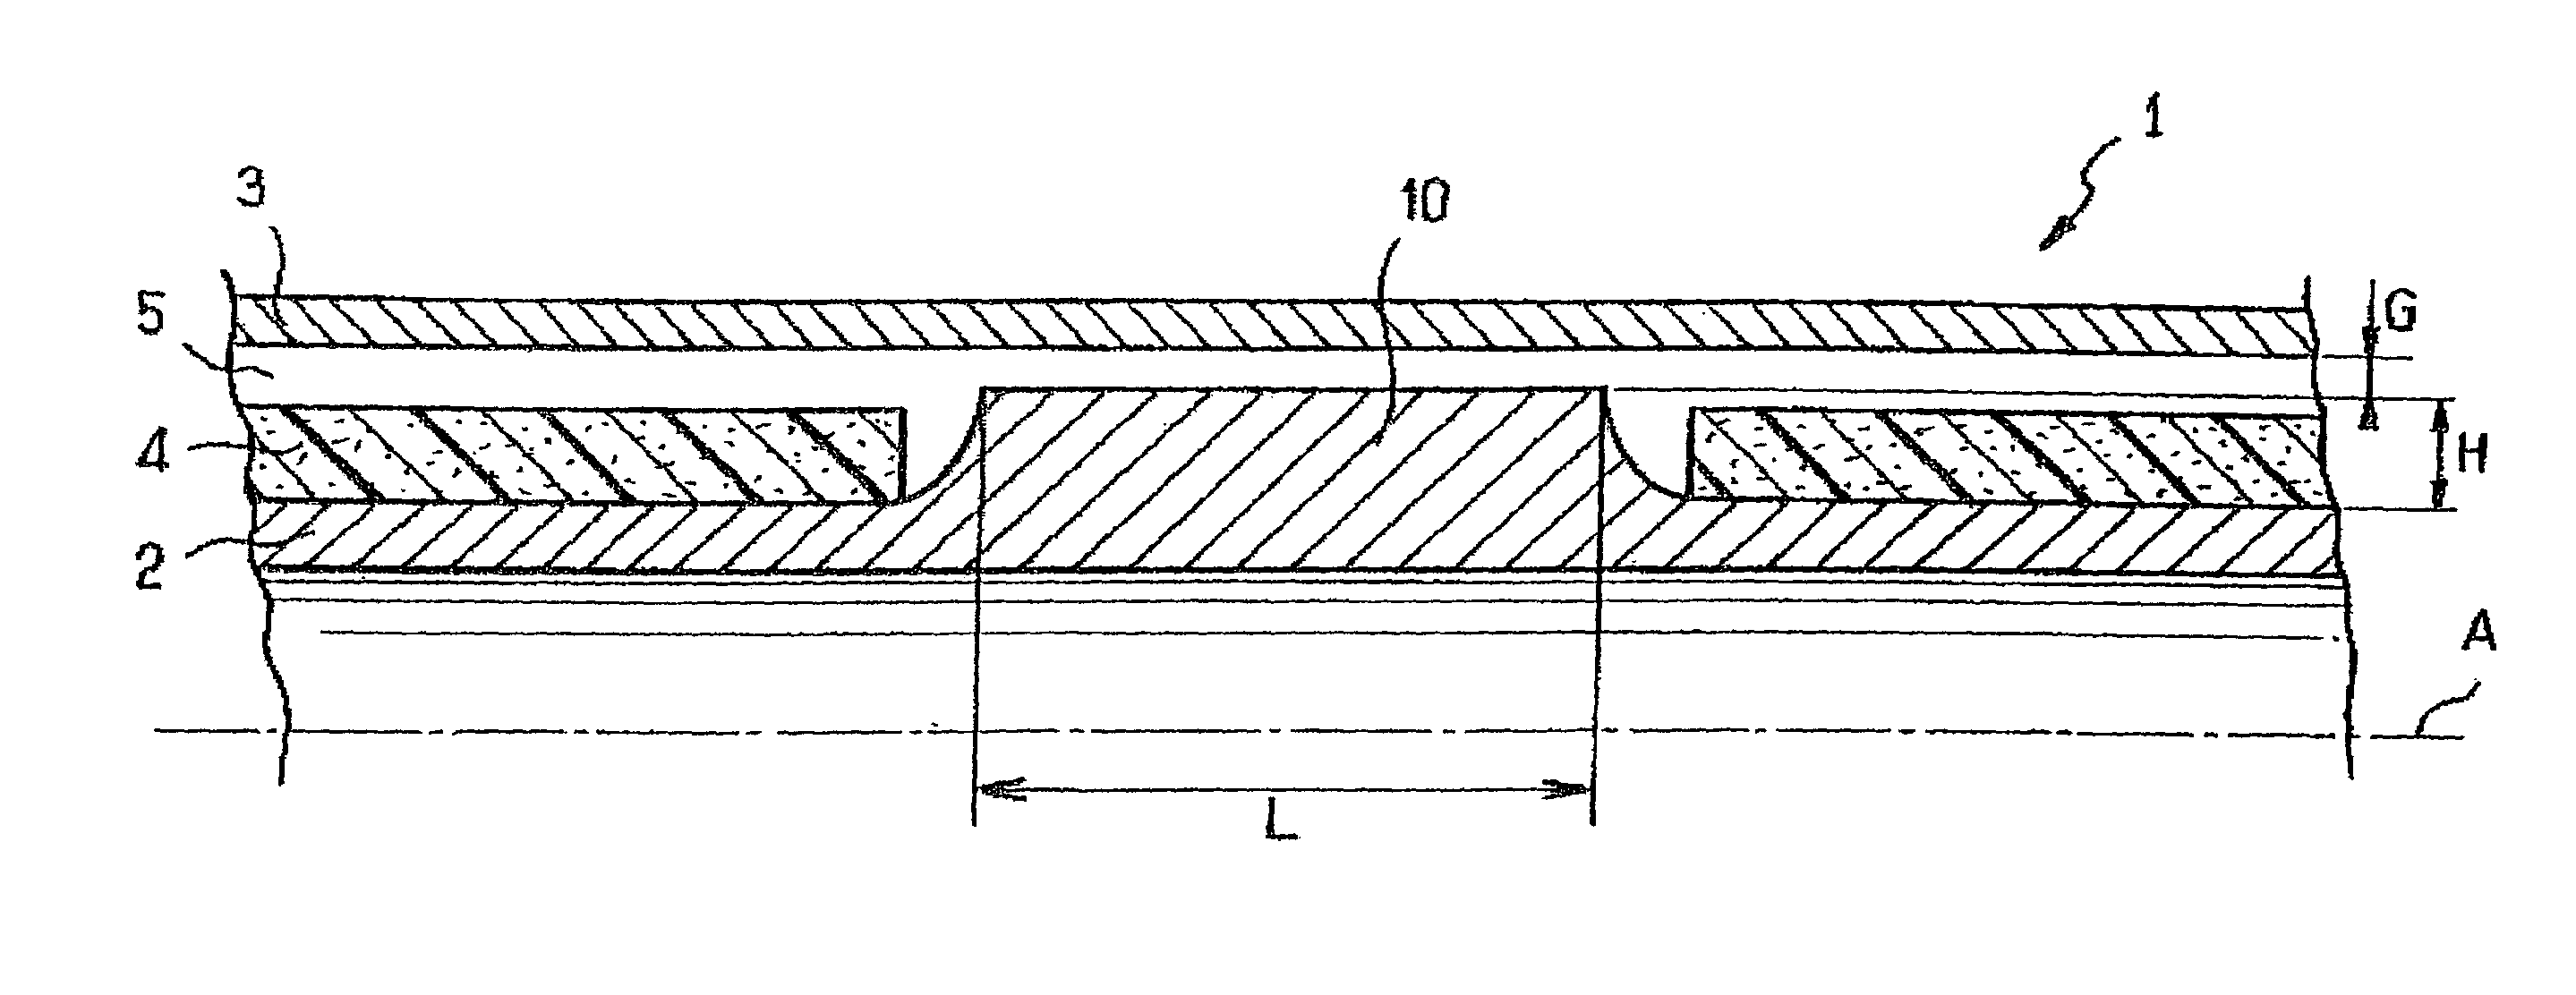 Double-sheath pipe for transporting fluids, provided with a device for limiting propagation of a buckle of the outer tube and method for limiting propagation